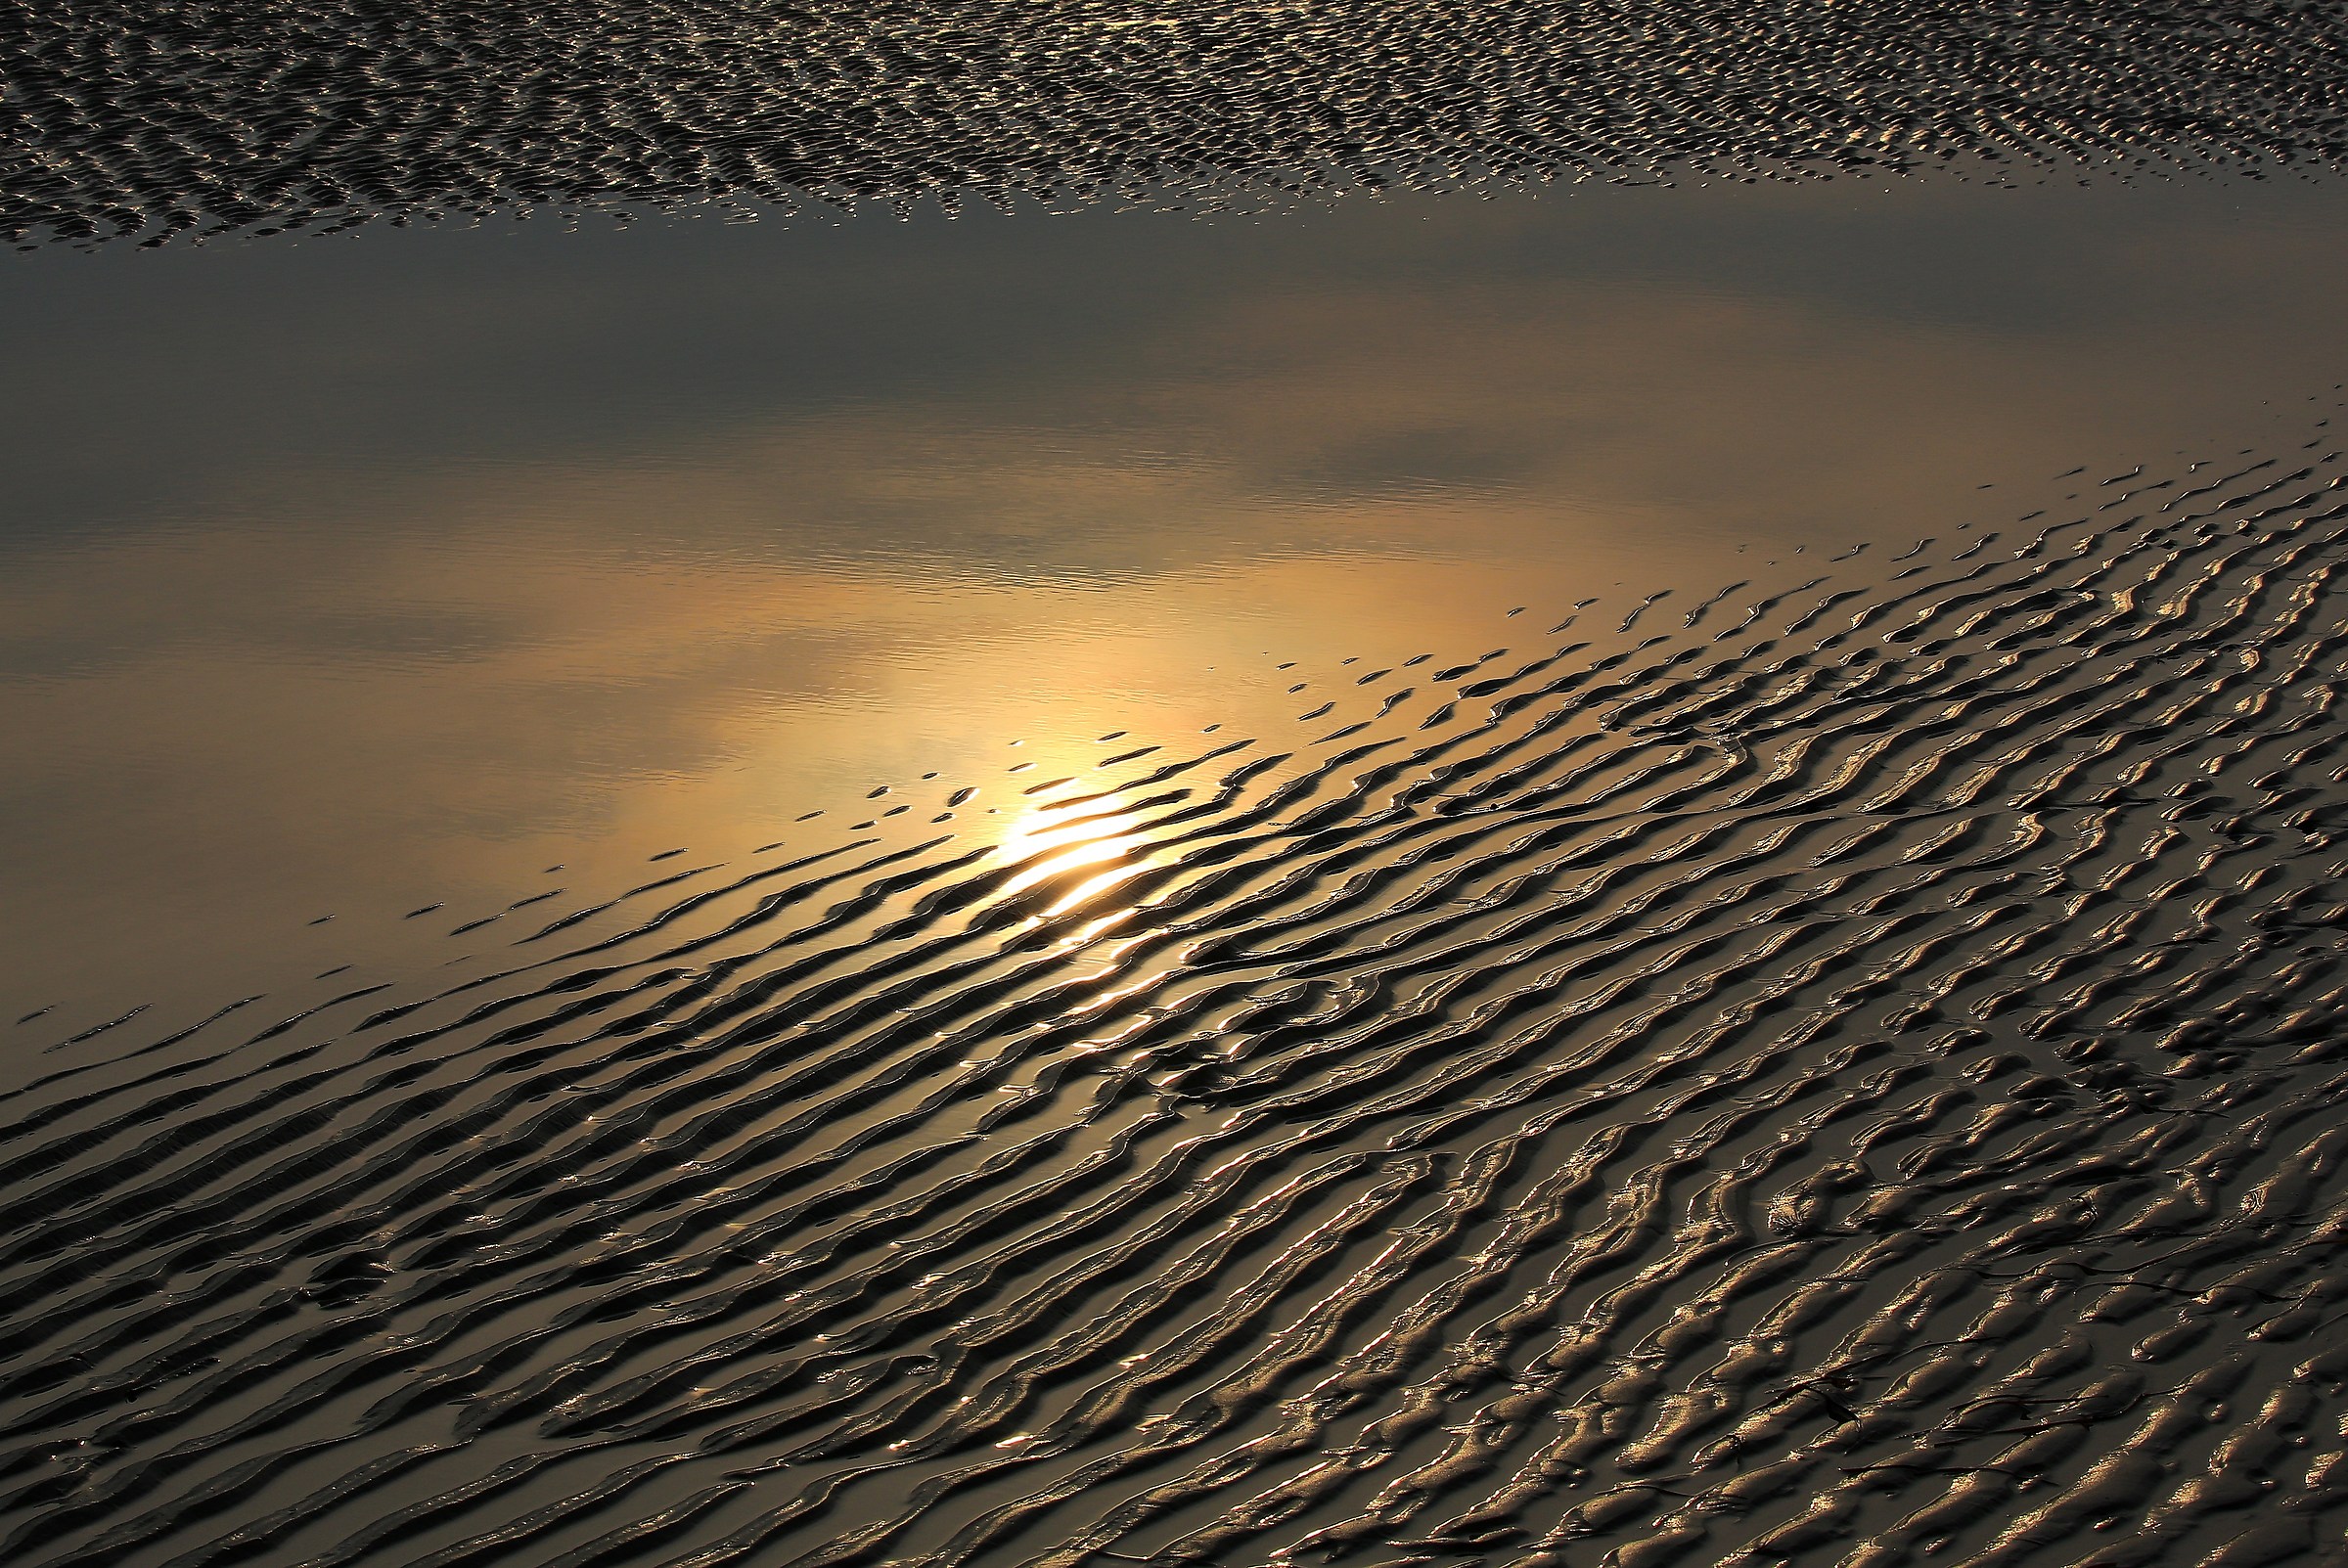 Reflections on the sand 2...